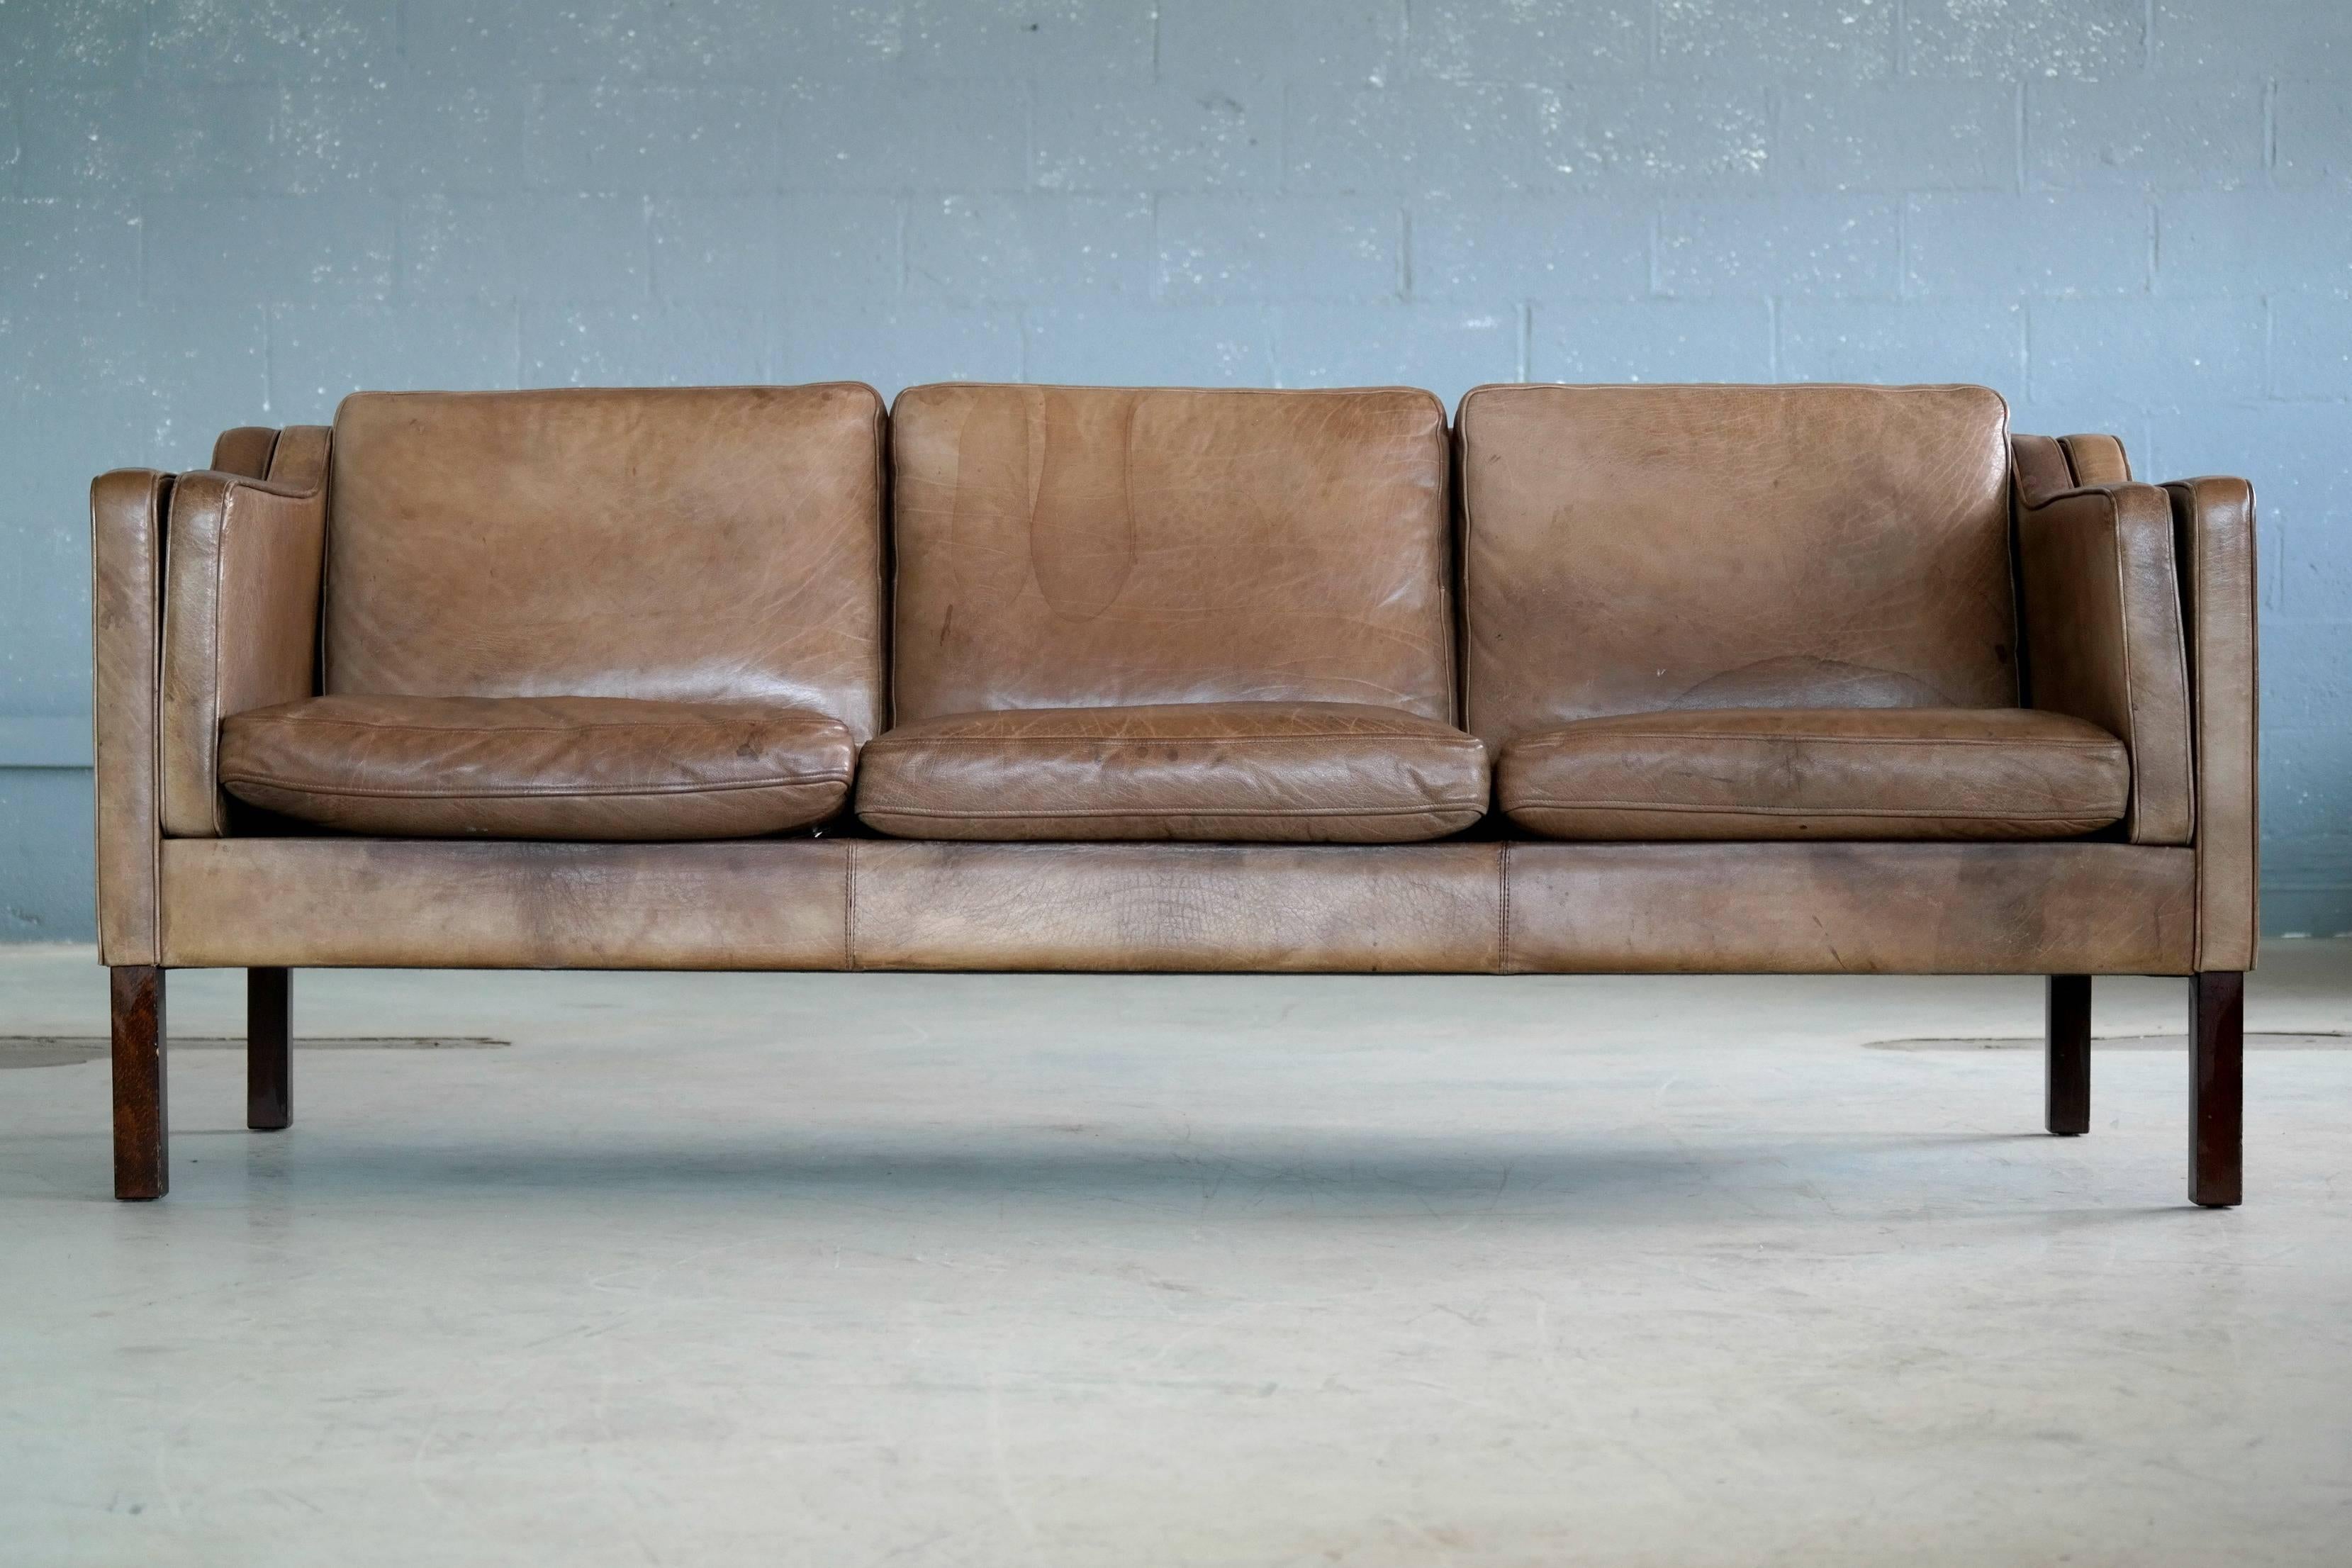 Classic Børge Mogensen style sofa model 2213 designed by Georg Thams in the late 1960s and manufactured by Vejen Polstermobelfabrik in Denmark, circa 1970. High quality buffalo leather displays the natural skin characteristics you would expect to